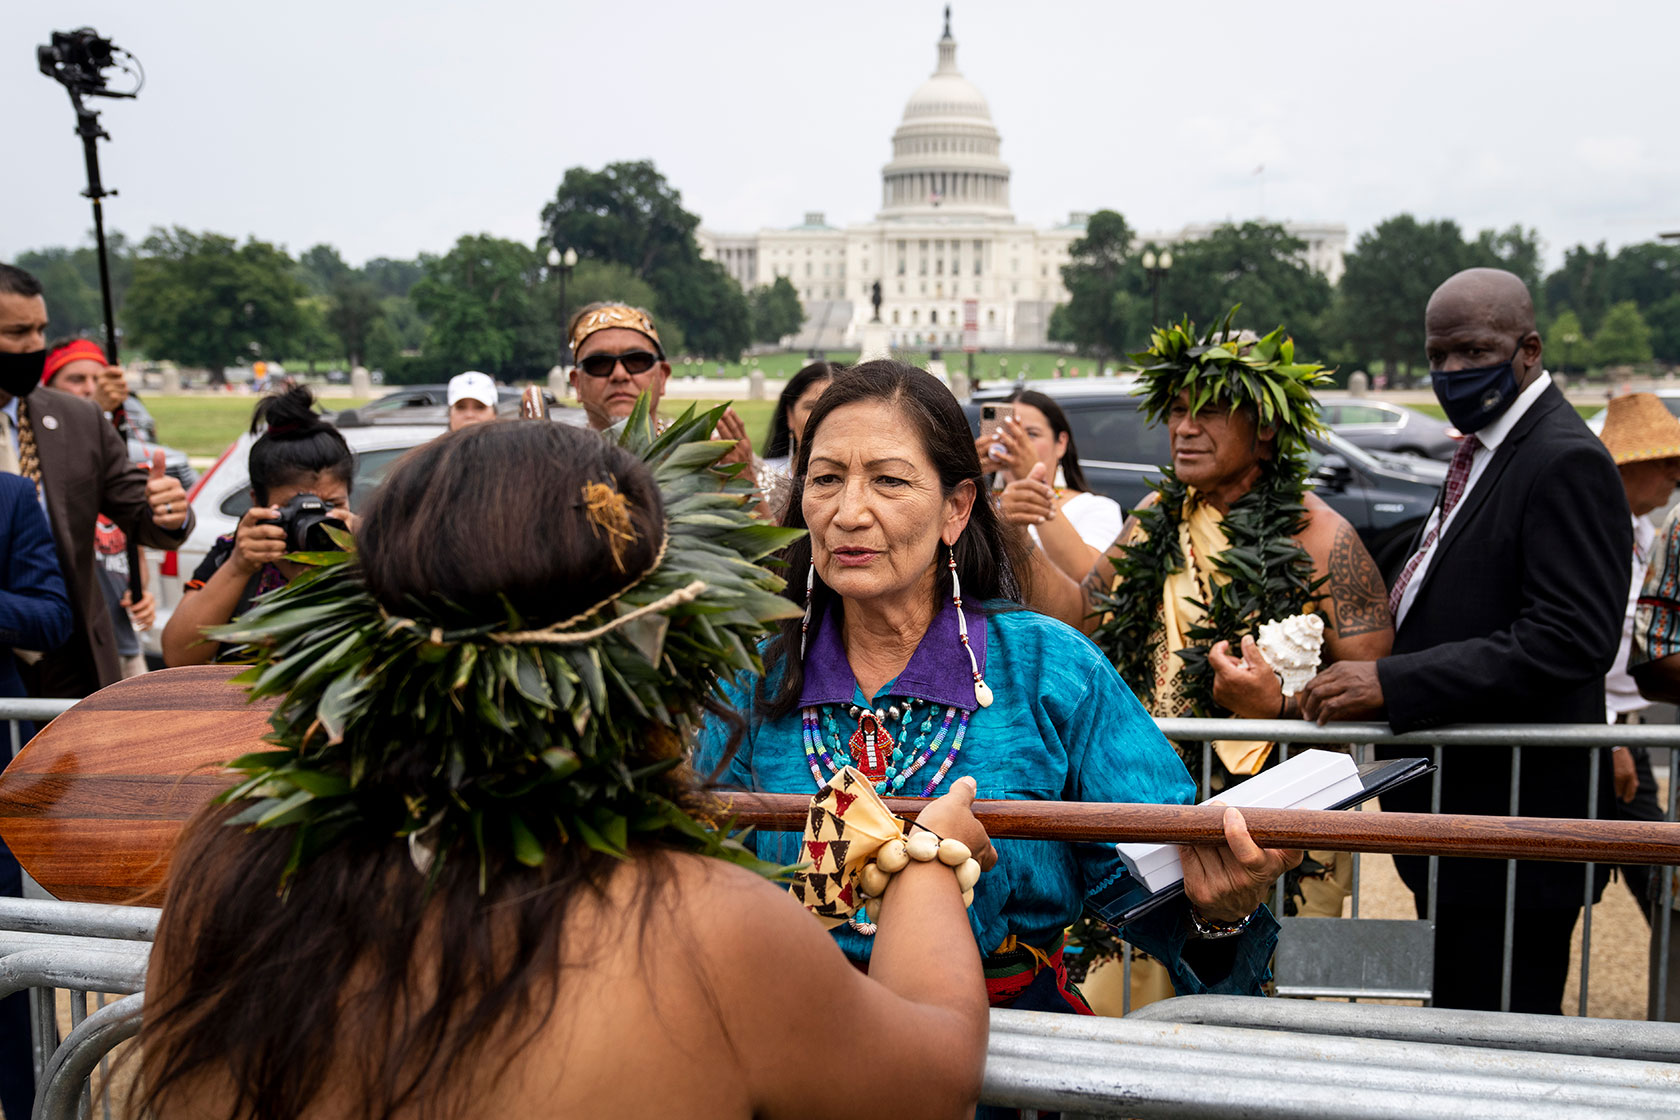 U.S. Secretary of the Interior Deb Haaland greets guests on the National Mall.